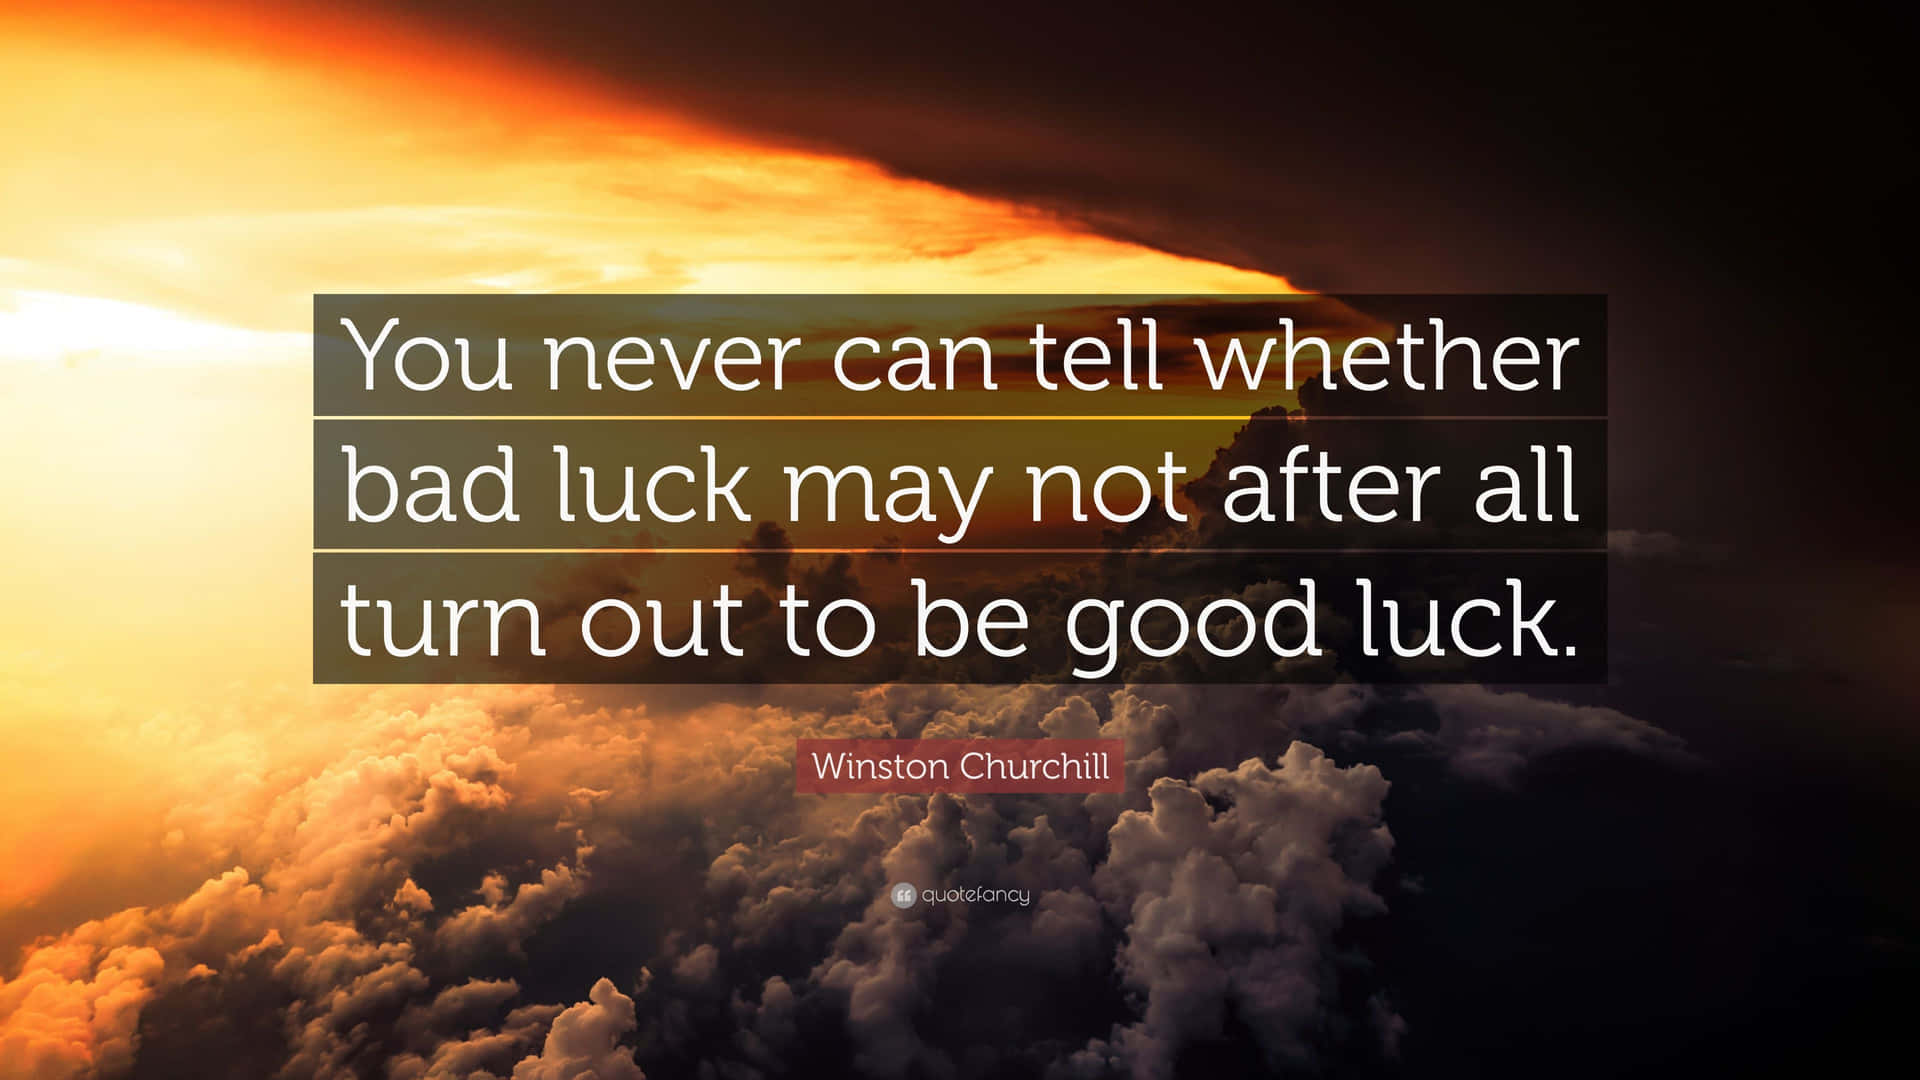 Never Can Tell Whether Bad Luck May Not After Turn Out To Be Good Luck